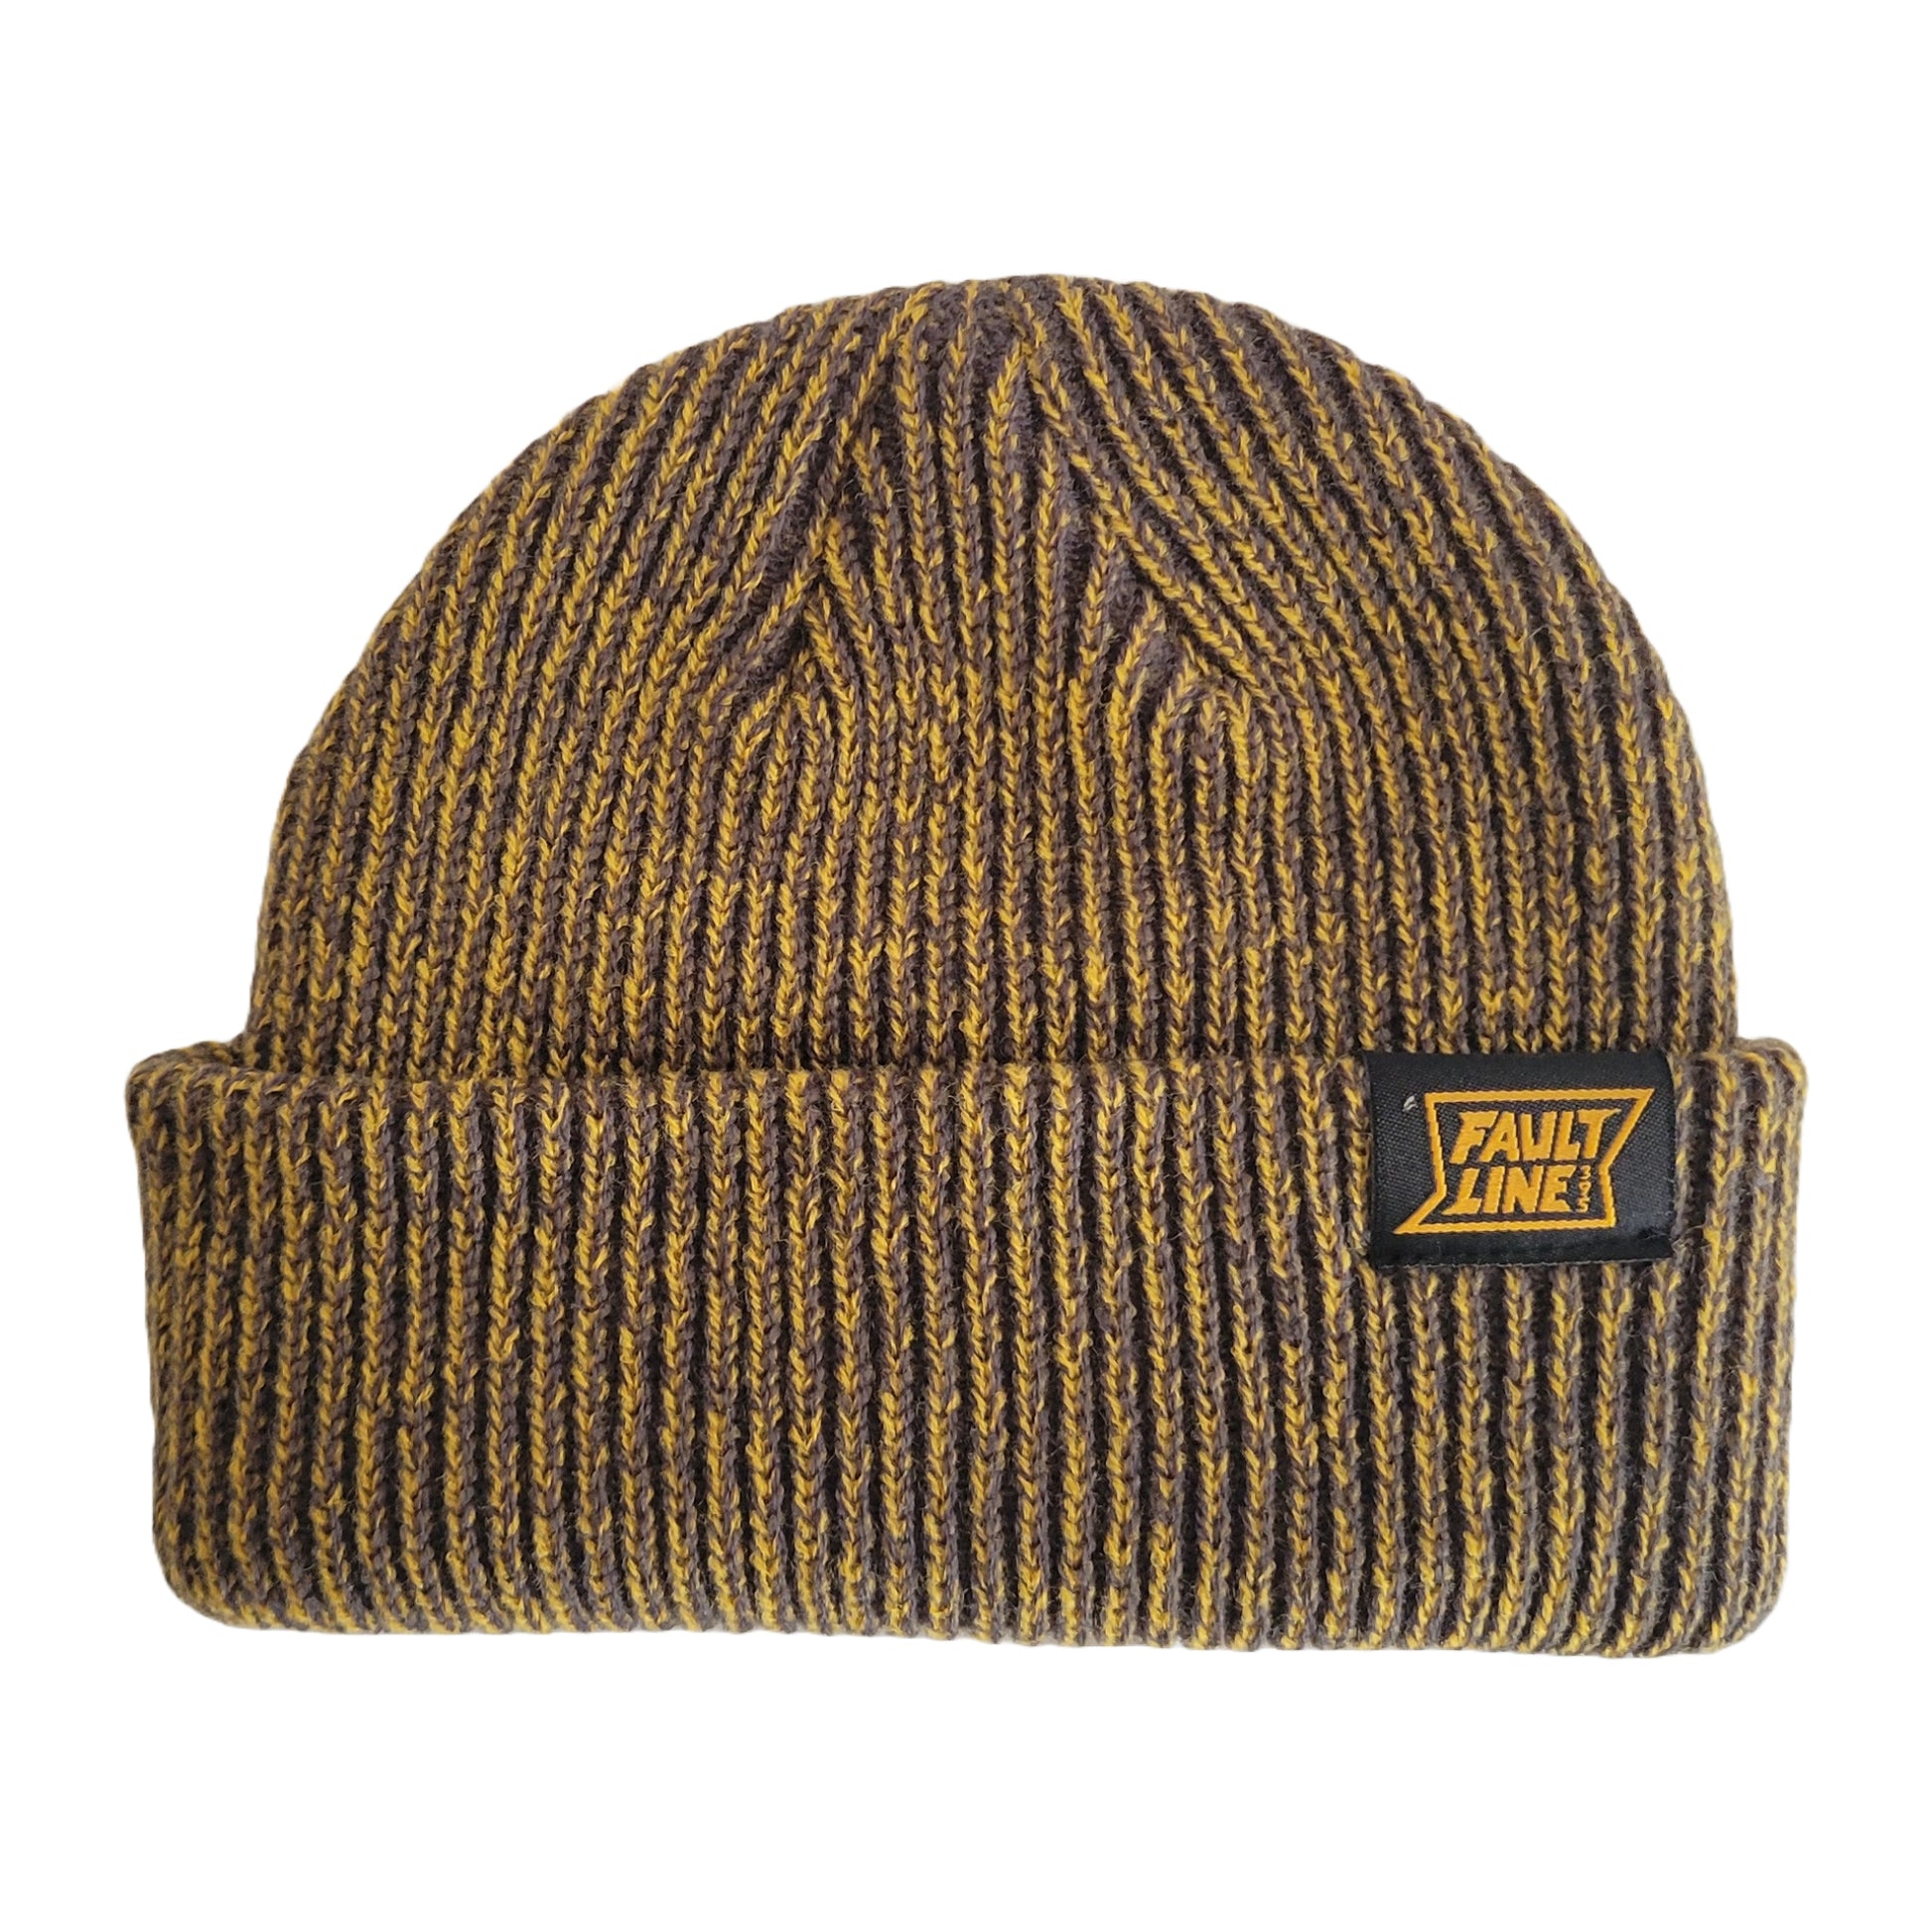 Broadway Beanie - Charcoal/Gold | FaultLine395 – Faultline395